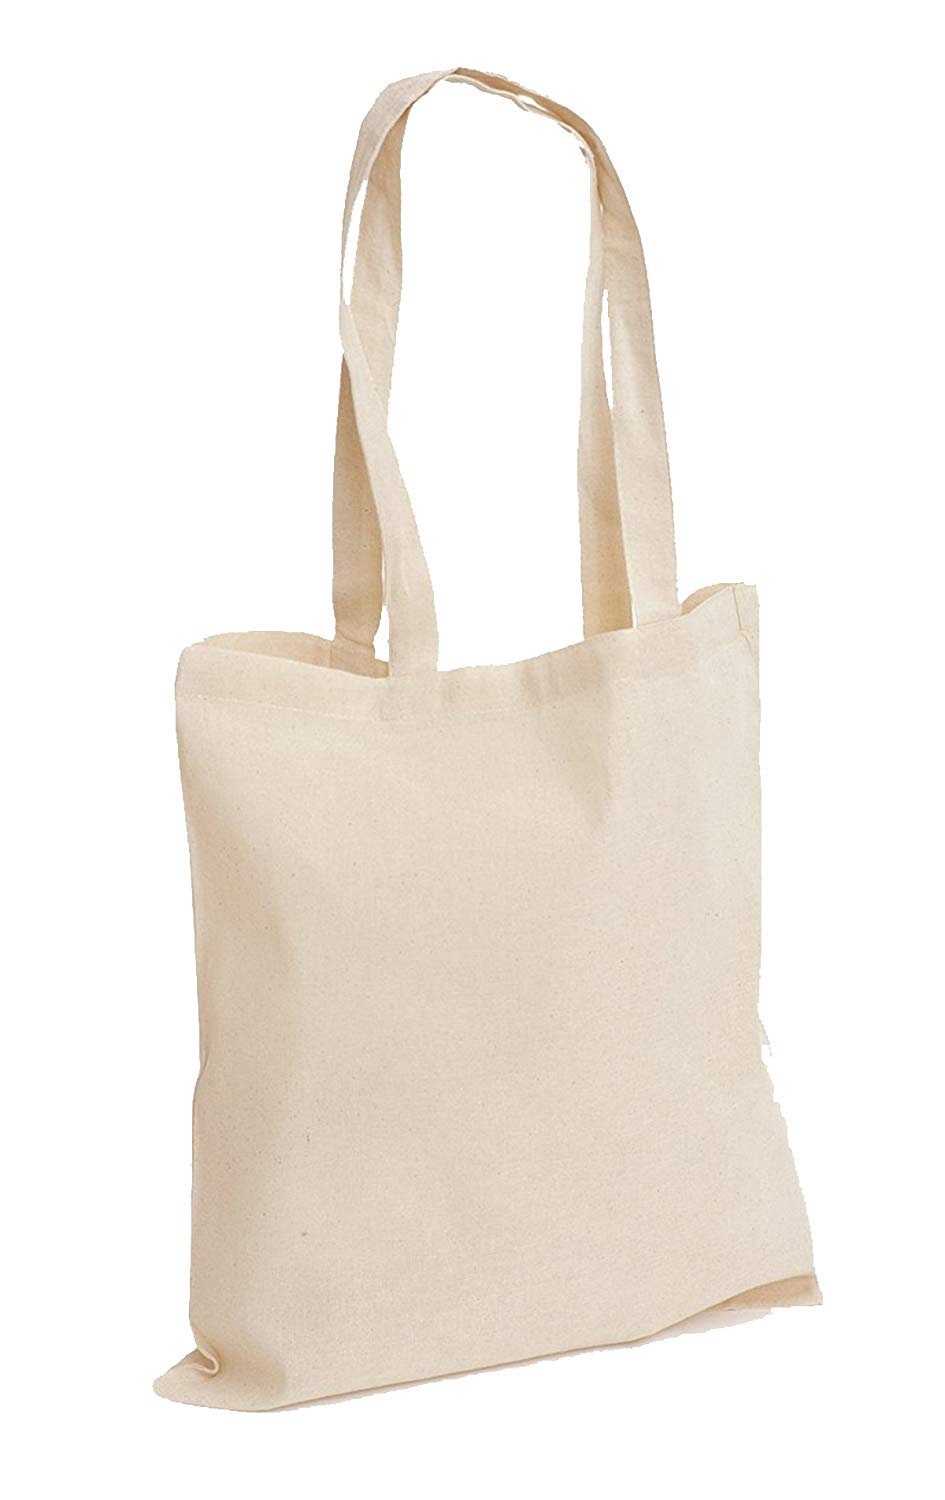 Plain Canvas Tote Bag, With Base, Black Bag, Book Bags ,blank Tote Bags,eco  Friendly Shoppers,quality Tote Wholesale,tote Bag Wholesale 